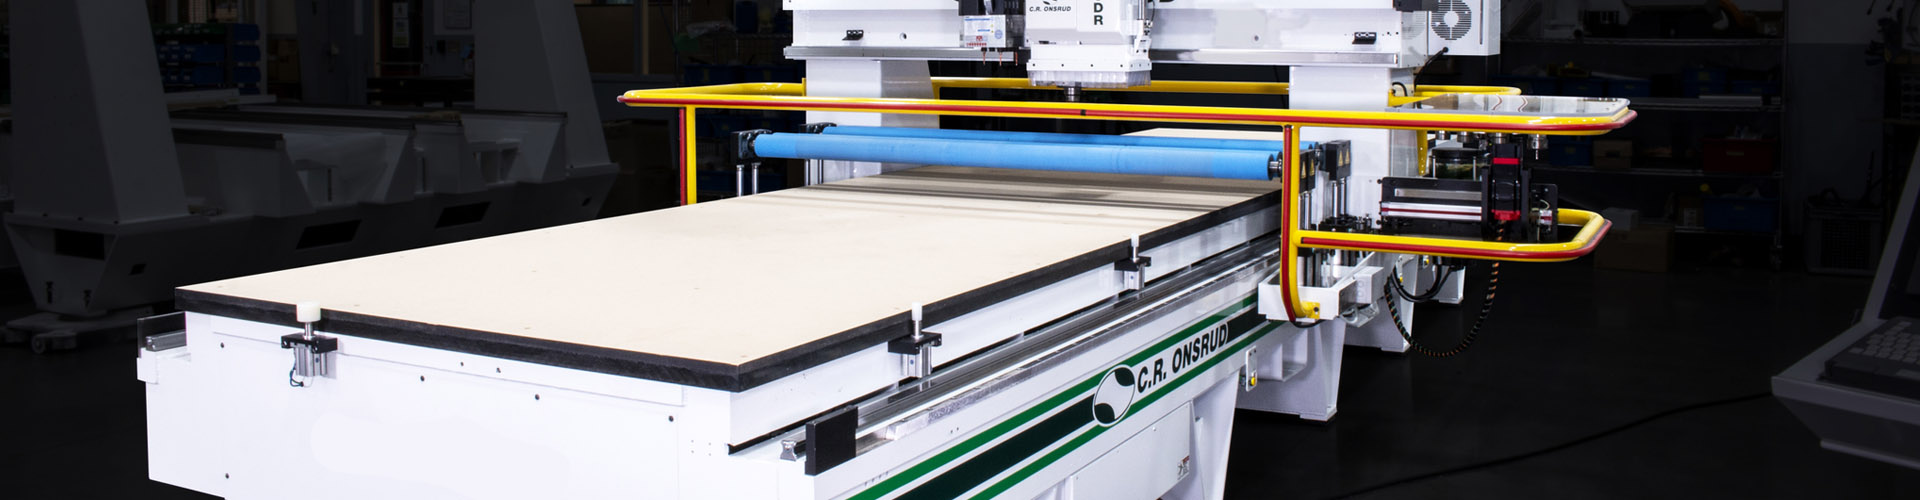 Roller Hold Down CNC Router